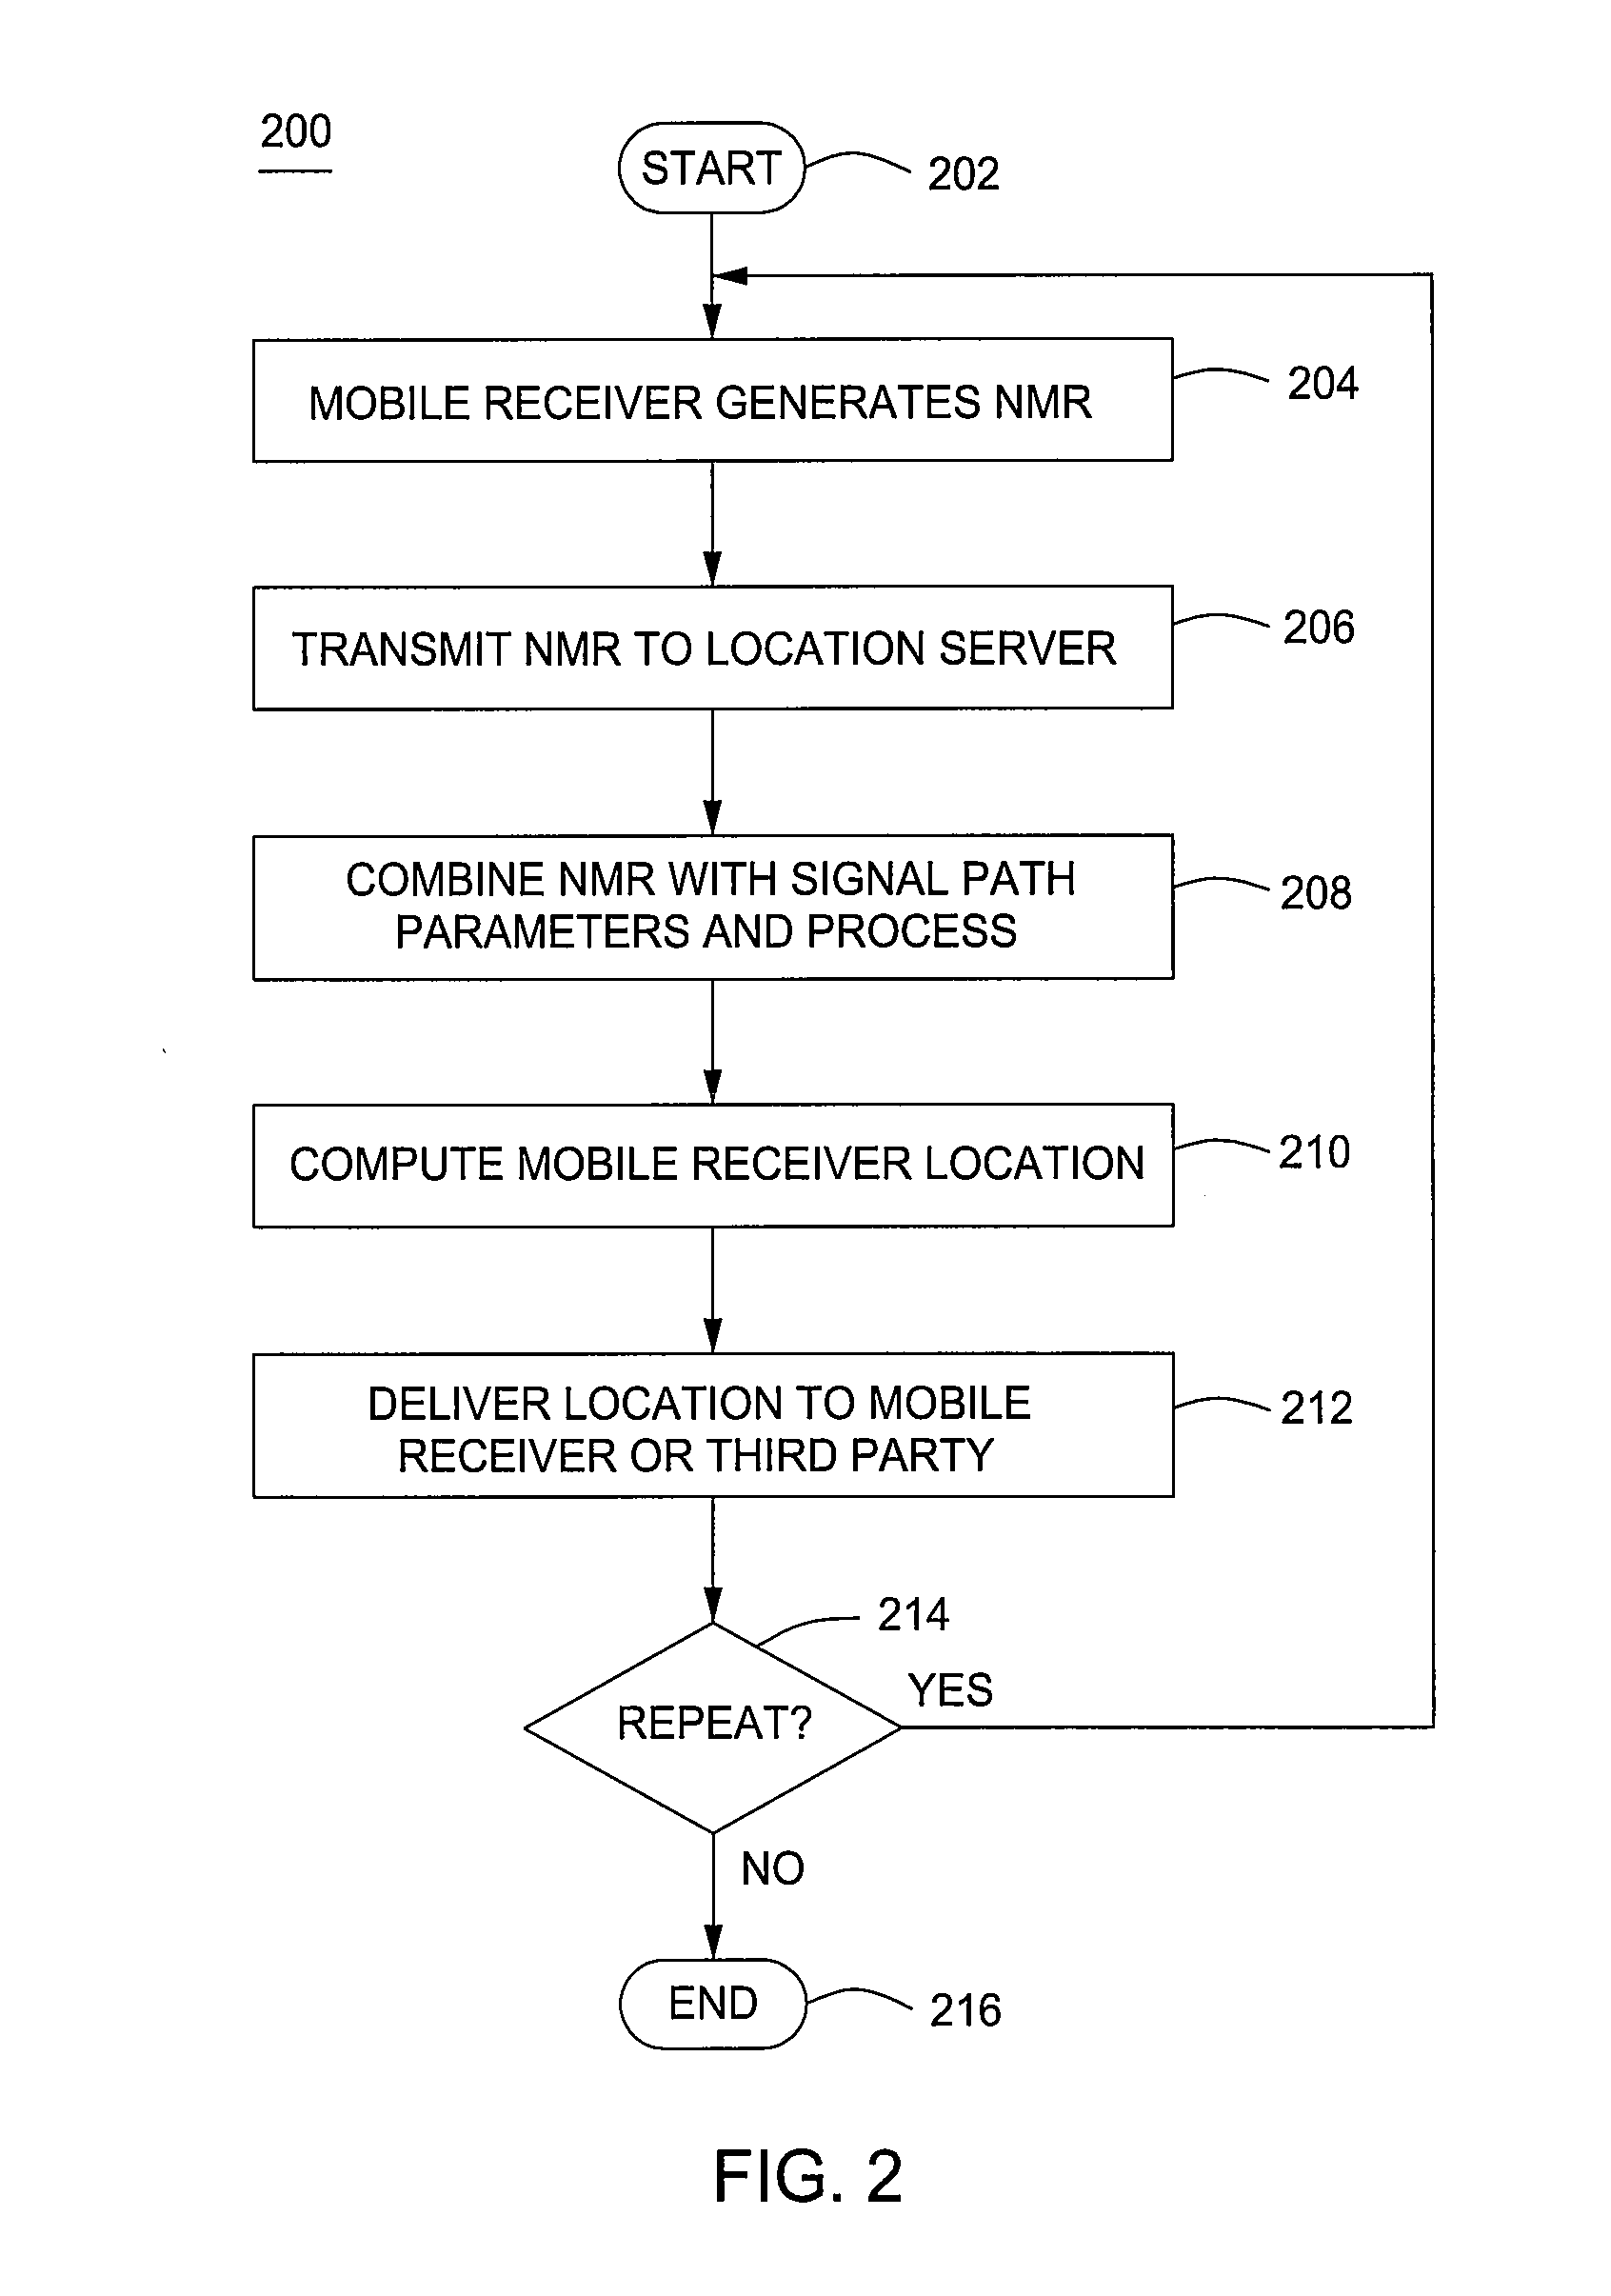 Computing geographical location of a mobile receiver using network measurement reports